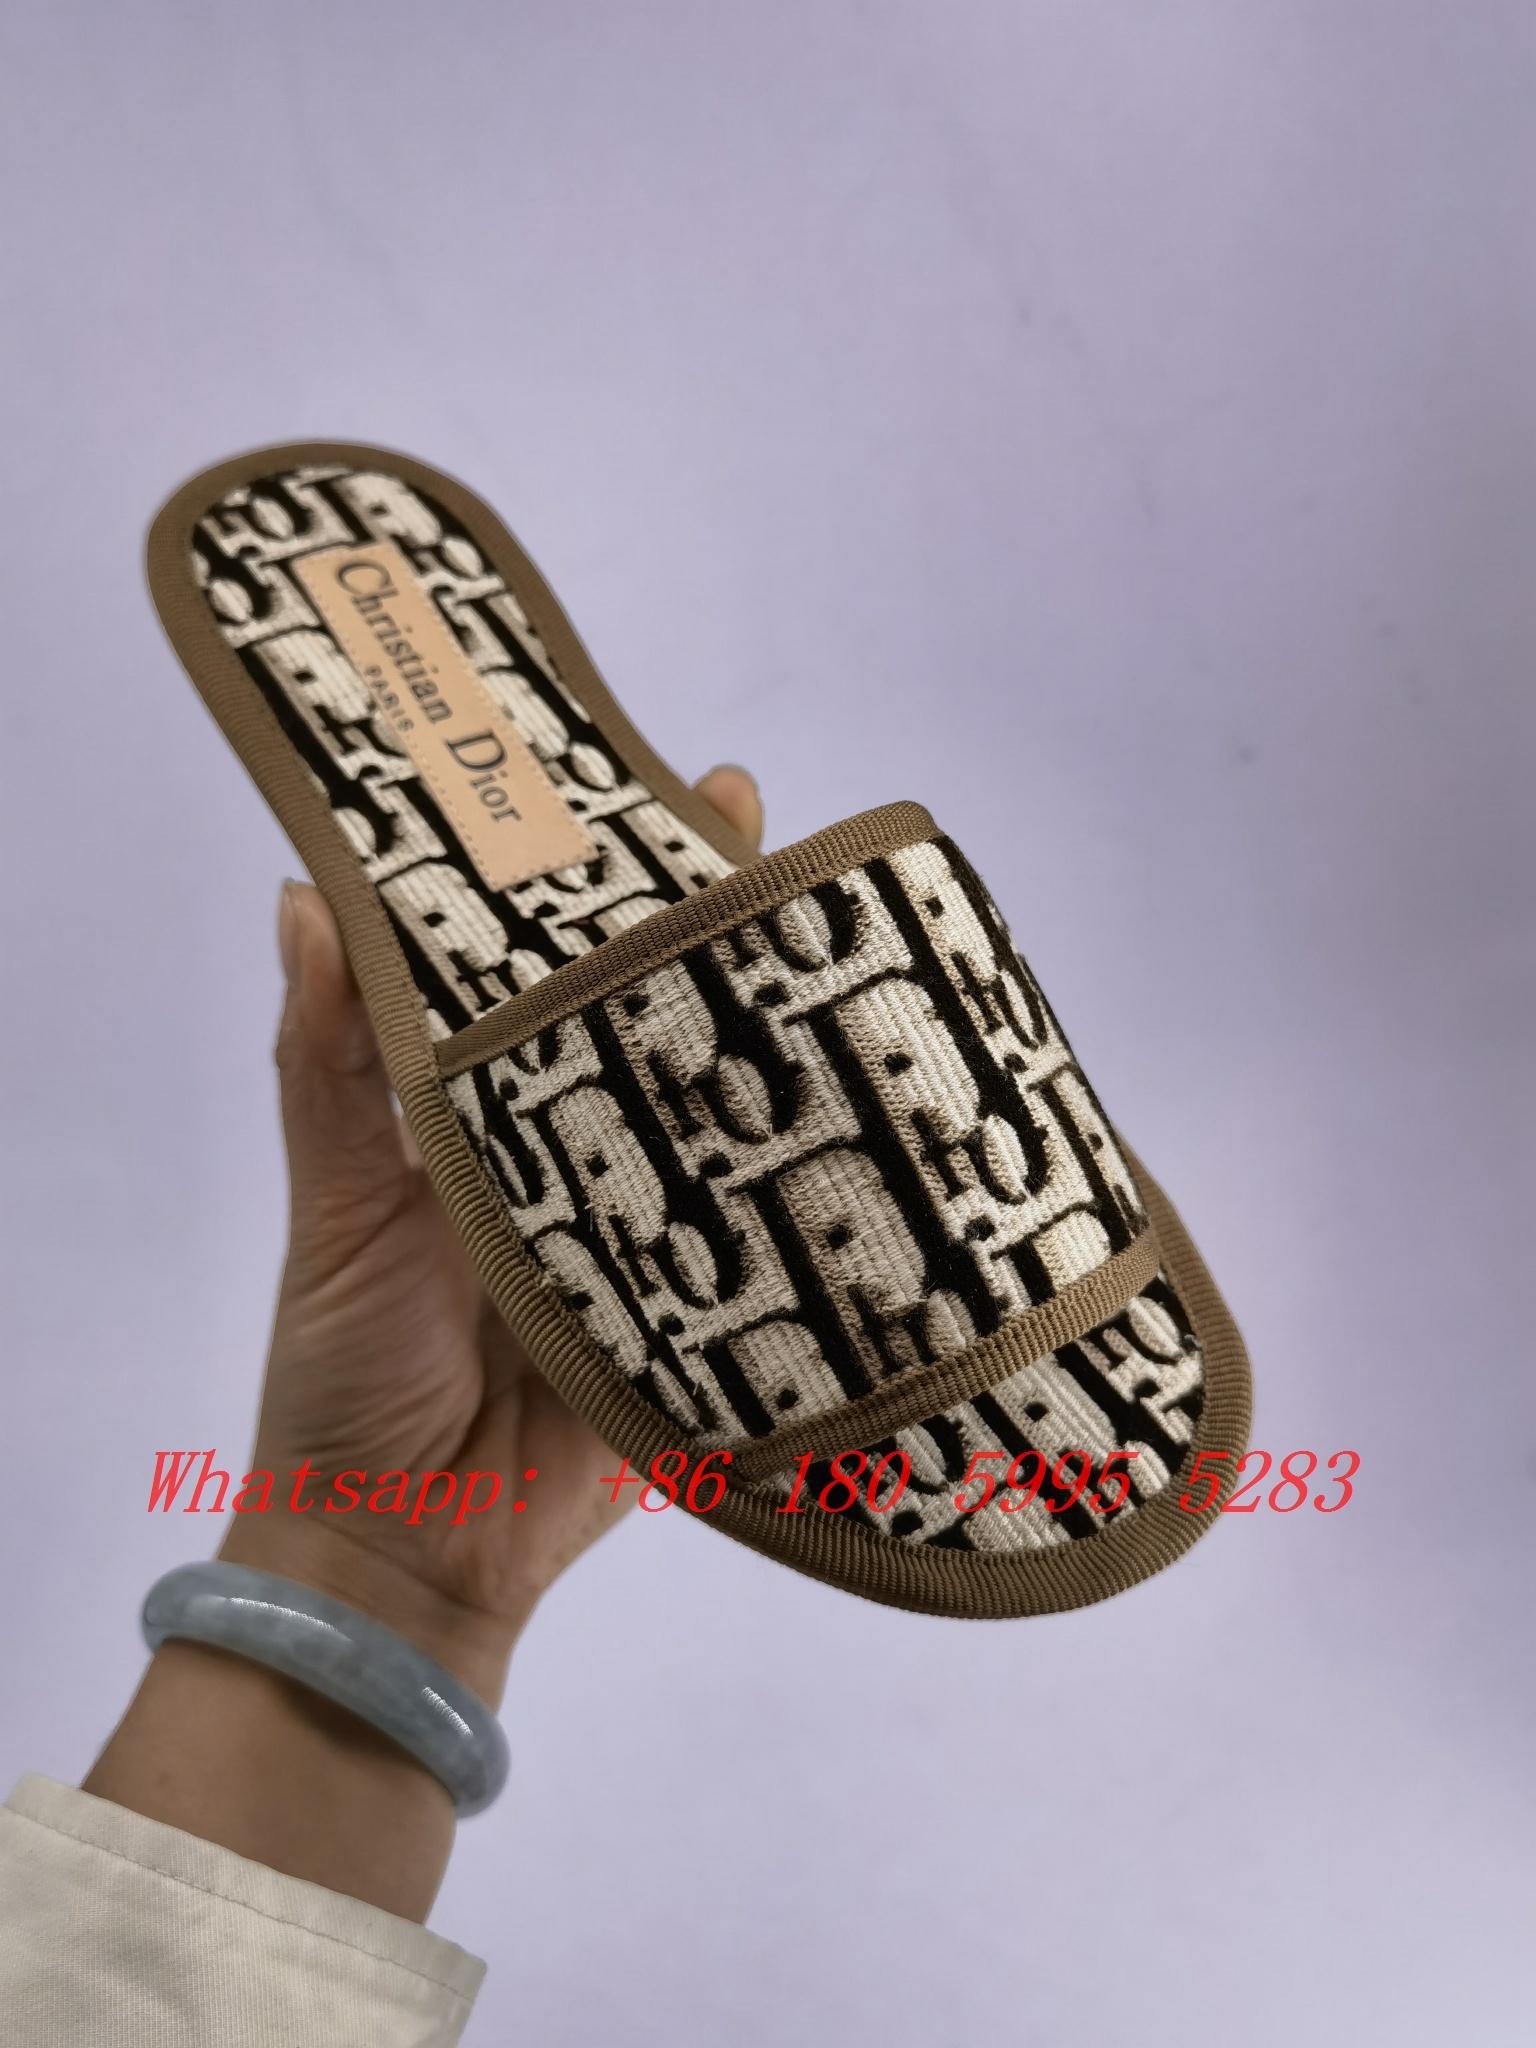 Wholesaler Top Quality Dior Sandals Women Slippers Hot Sale Dior Shoes